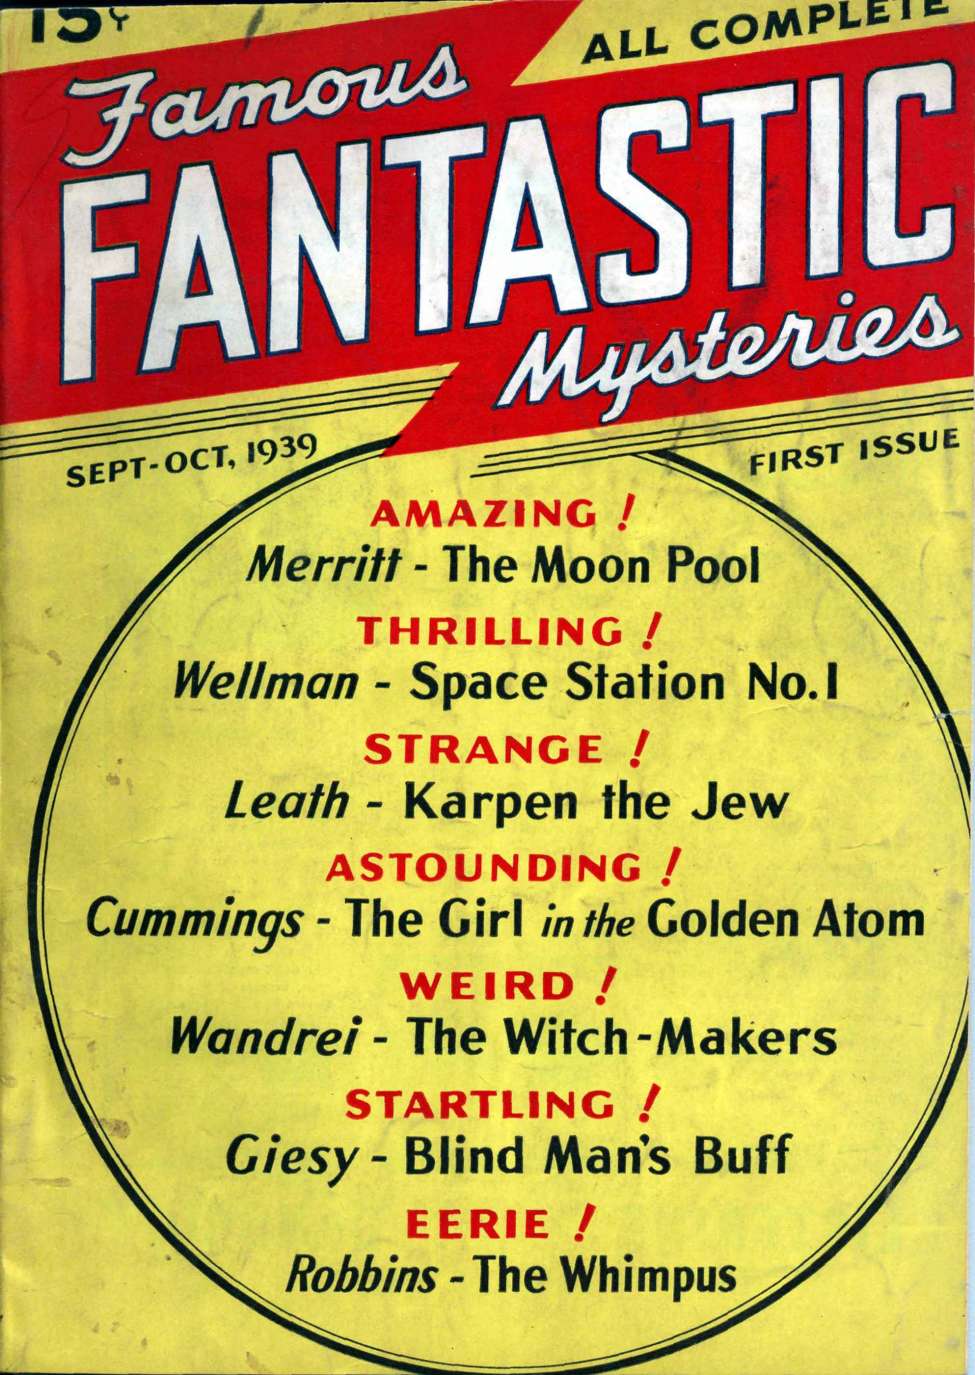 Comic Book Cover For Famous Fantastic Mysteries v1 1 - The Moon Pool - A. Merritt